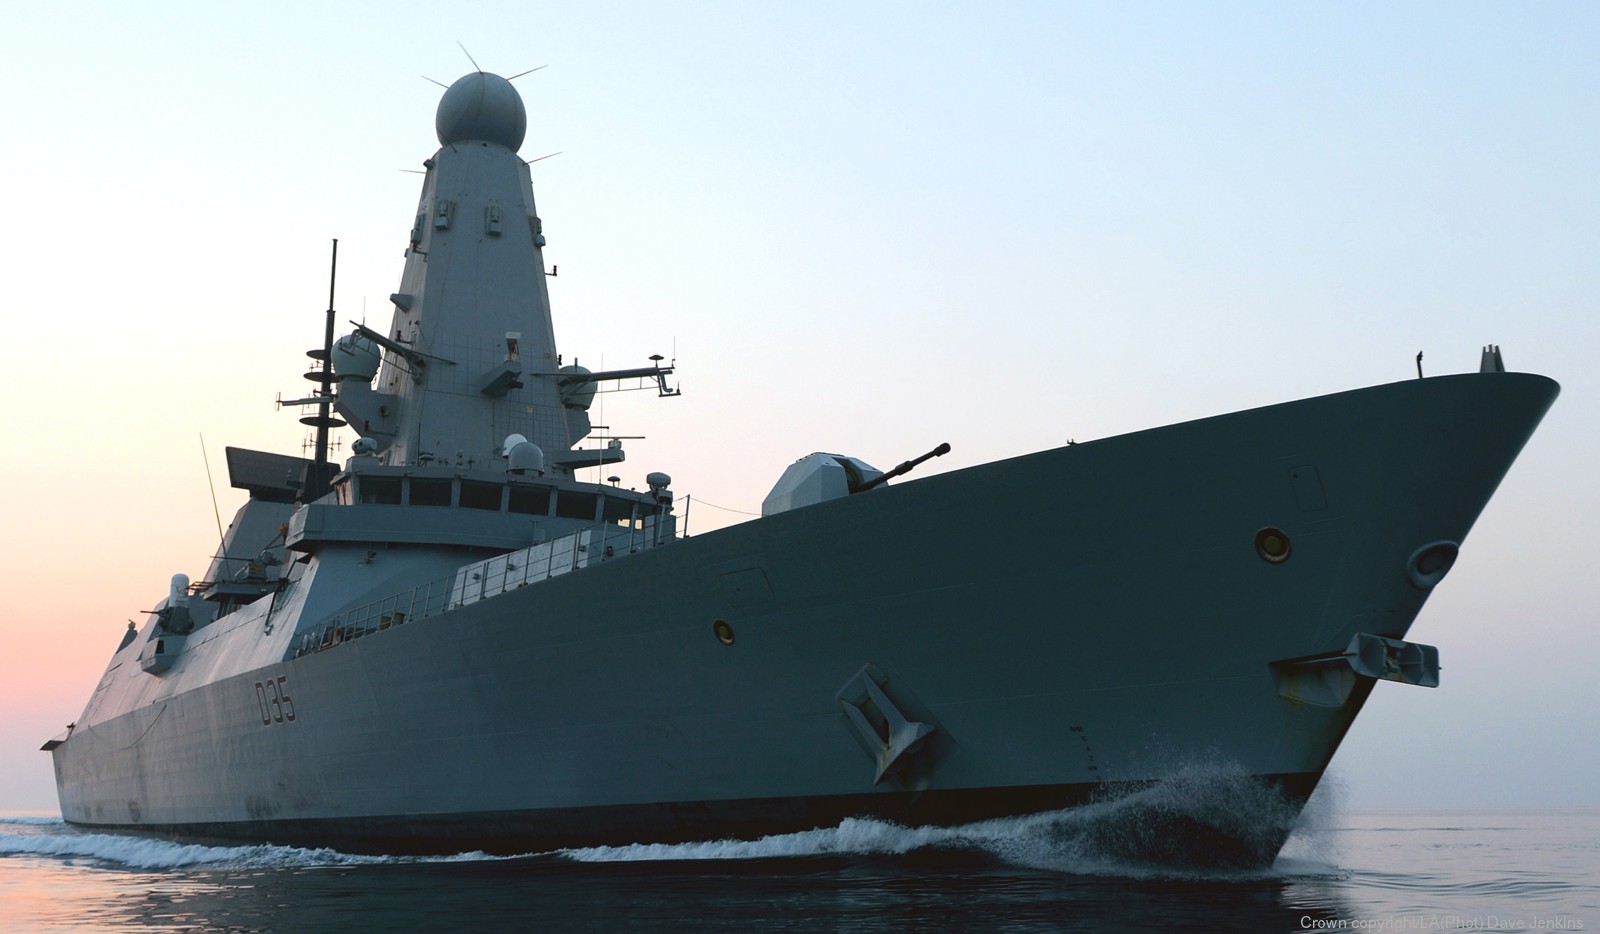 hms dragon d-35 type 45 daring class guided missile destroyer ddg royal navy sea viper paams 23